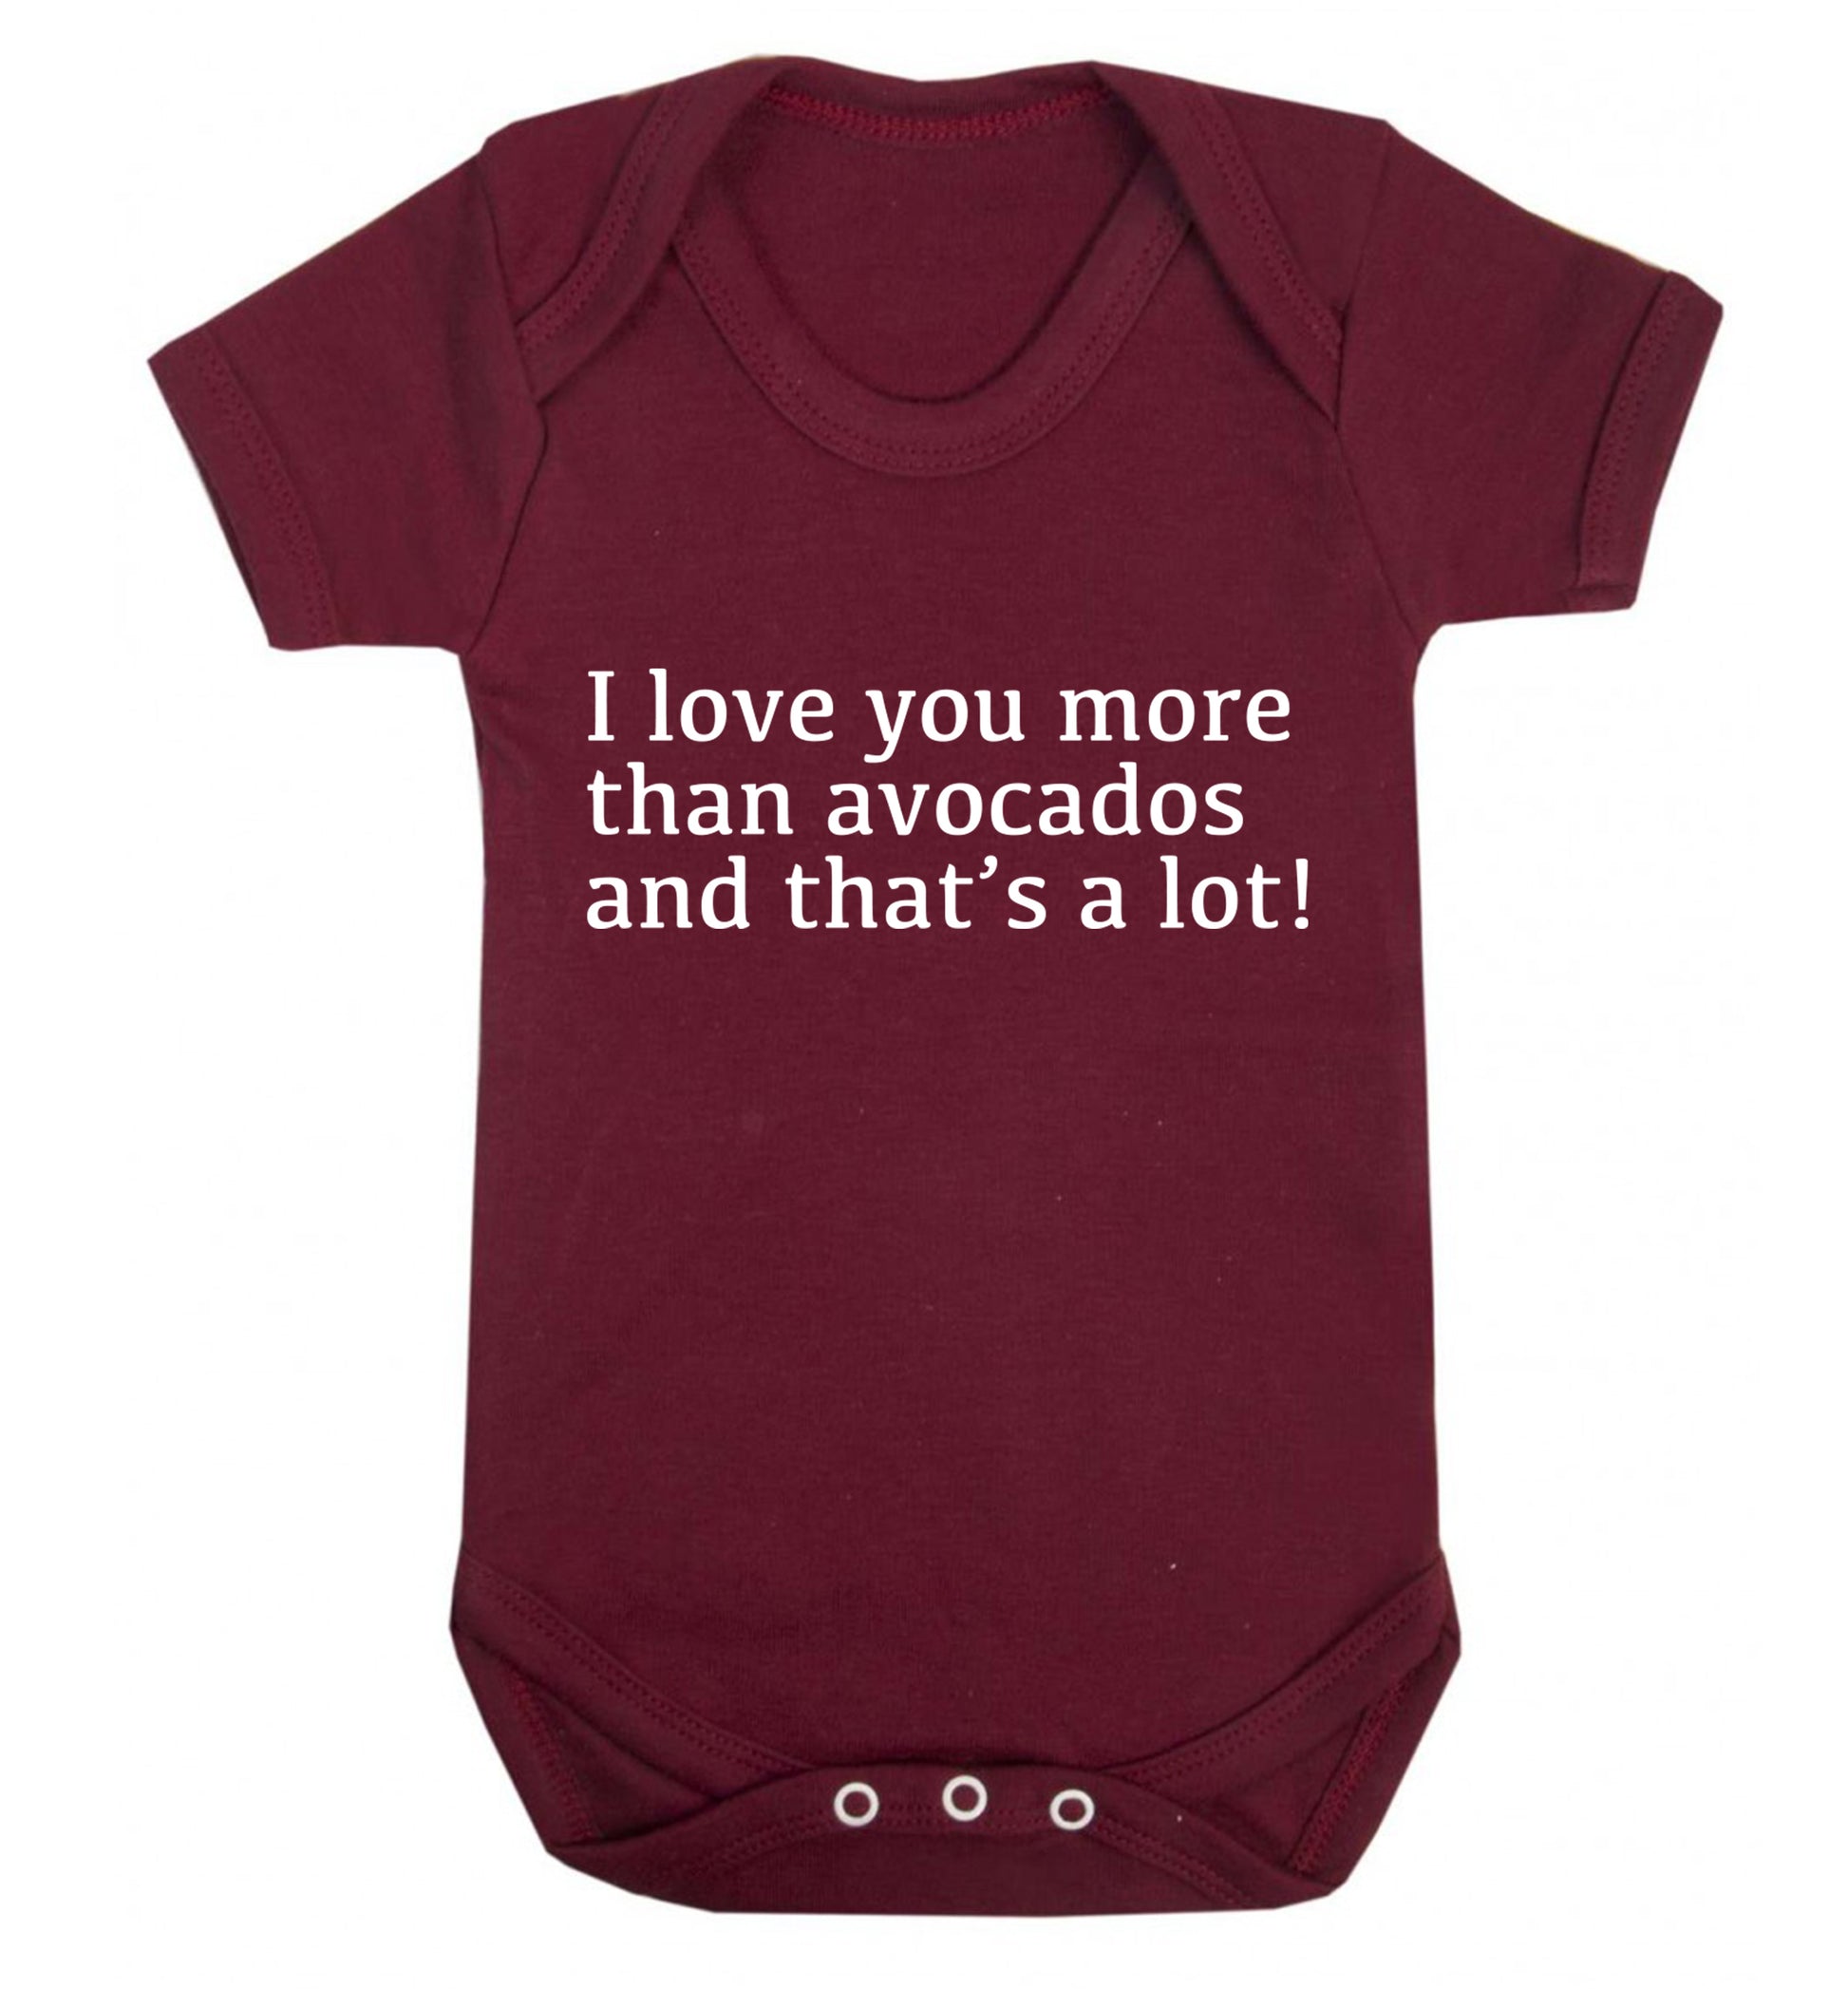 I love you more than avocados and that's a lot Baby Vest maroon 18-24 months